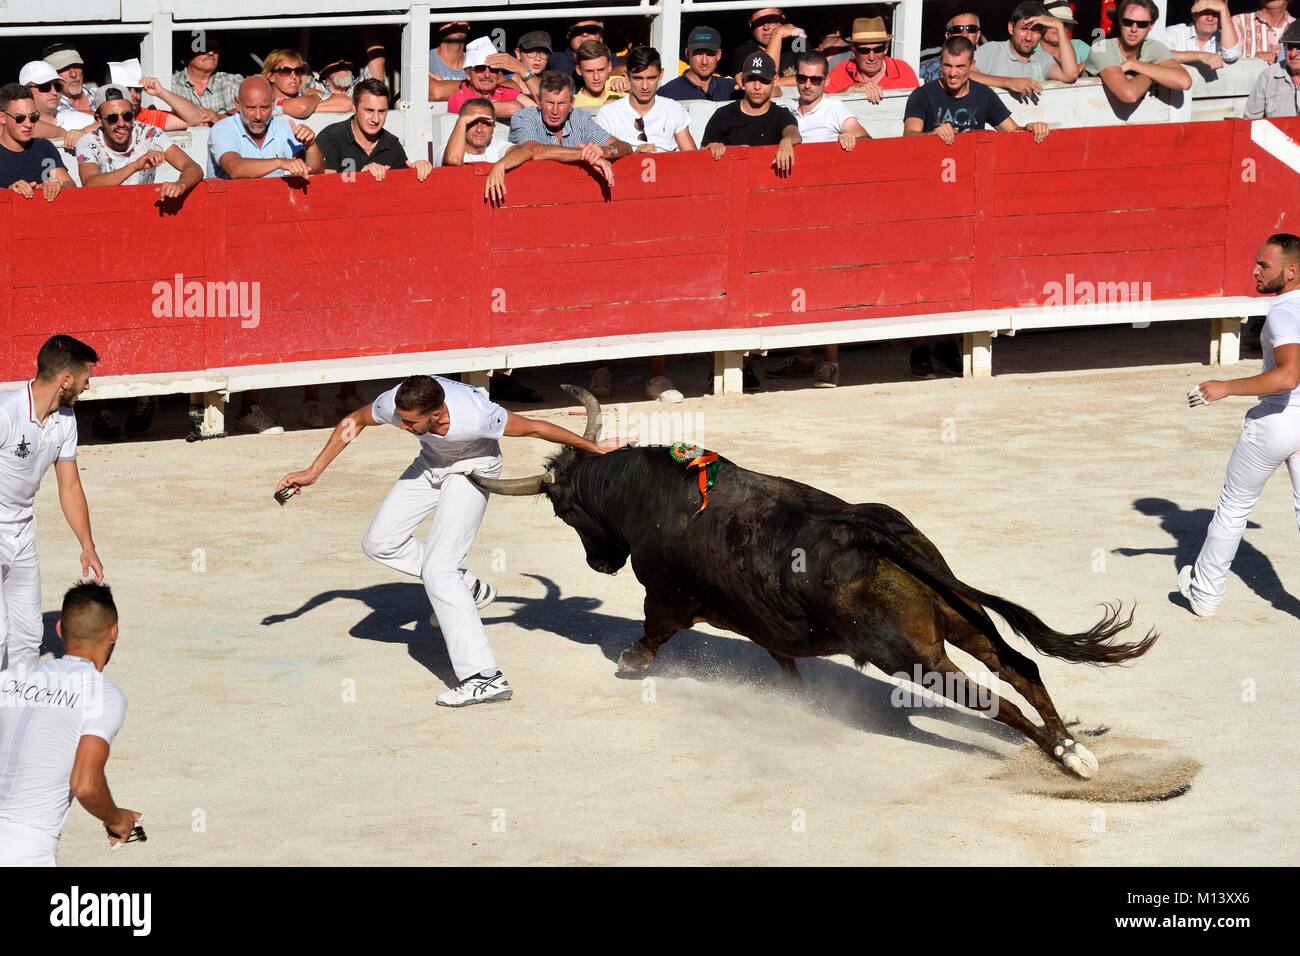 France, Bouches du Rhone, Arles, the course camarguaise of the Cocarde d'Or at the Arenas, raseteur trying to catch the award-winning attributes on the horns of the bull Stock Photo